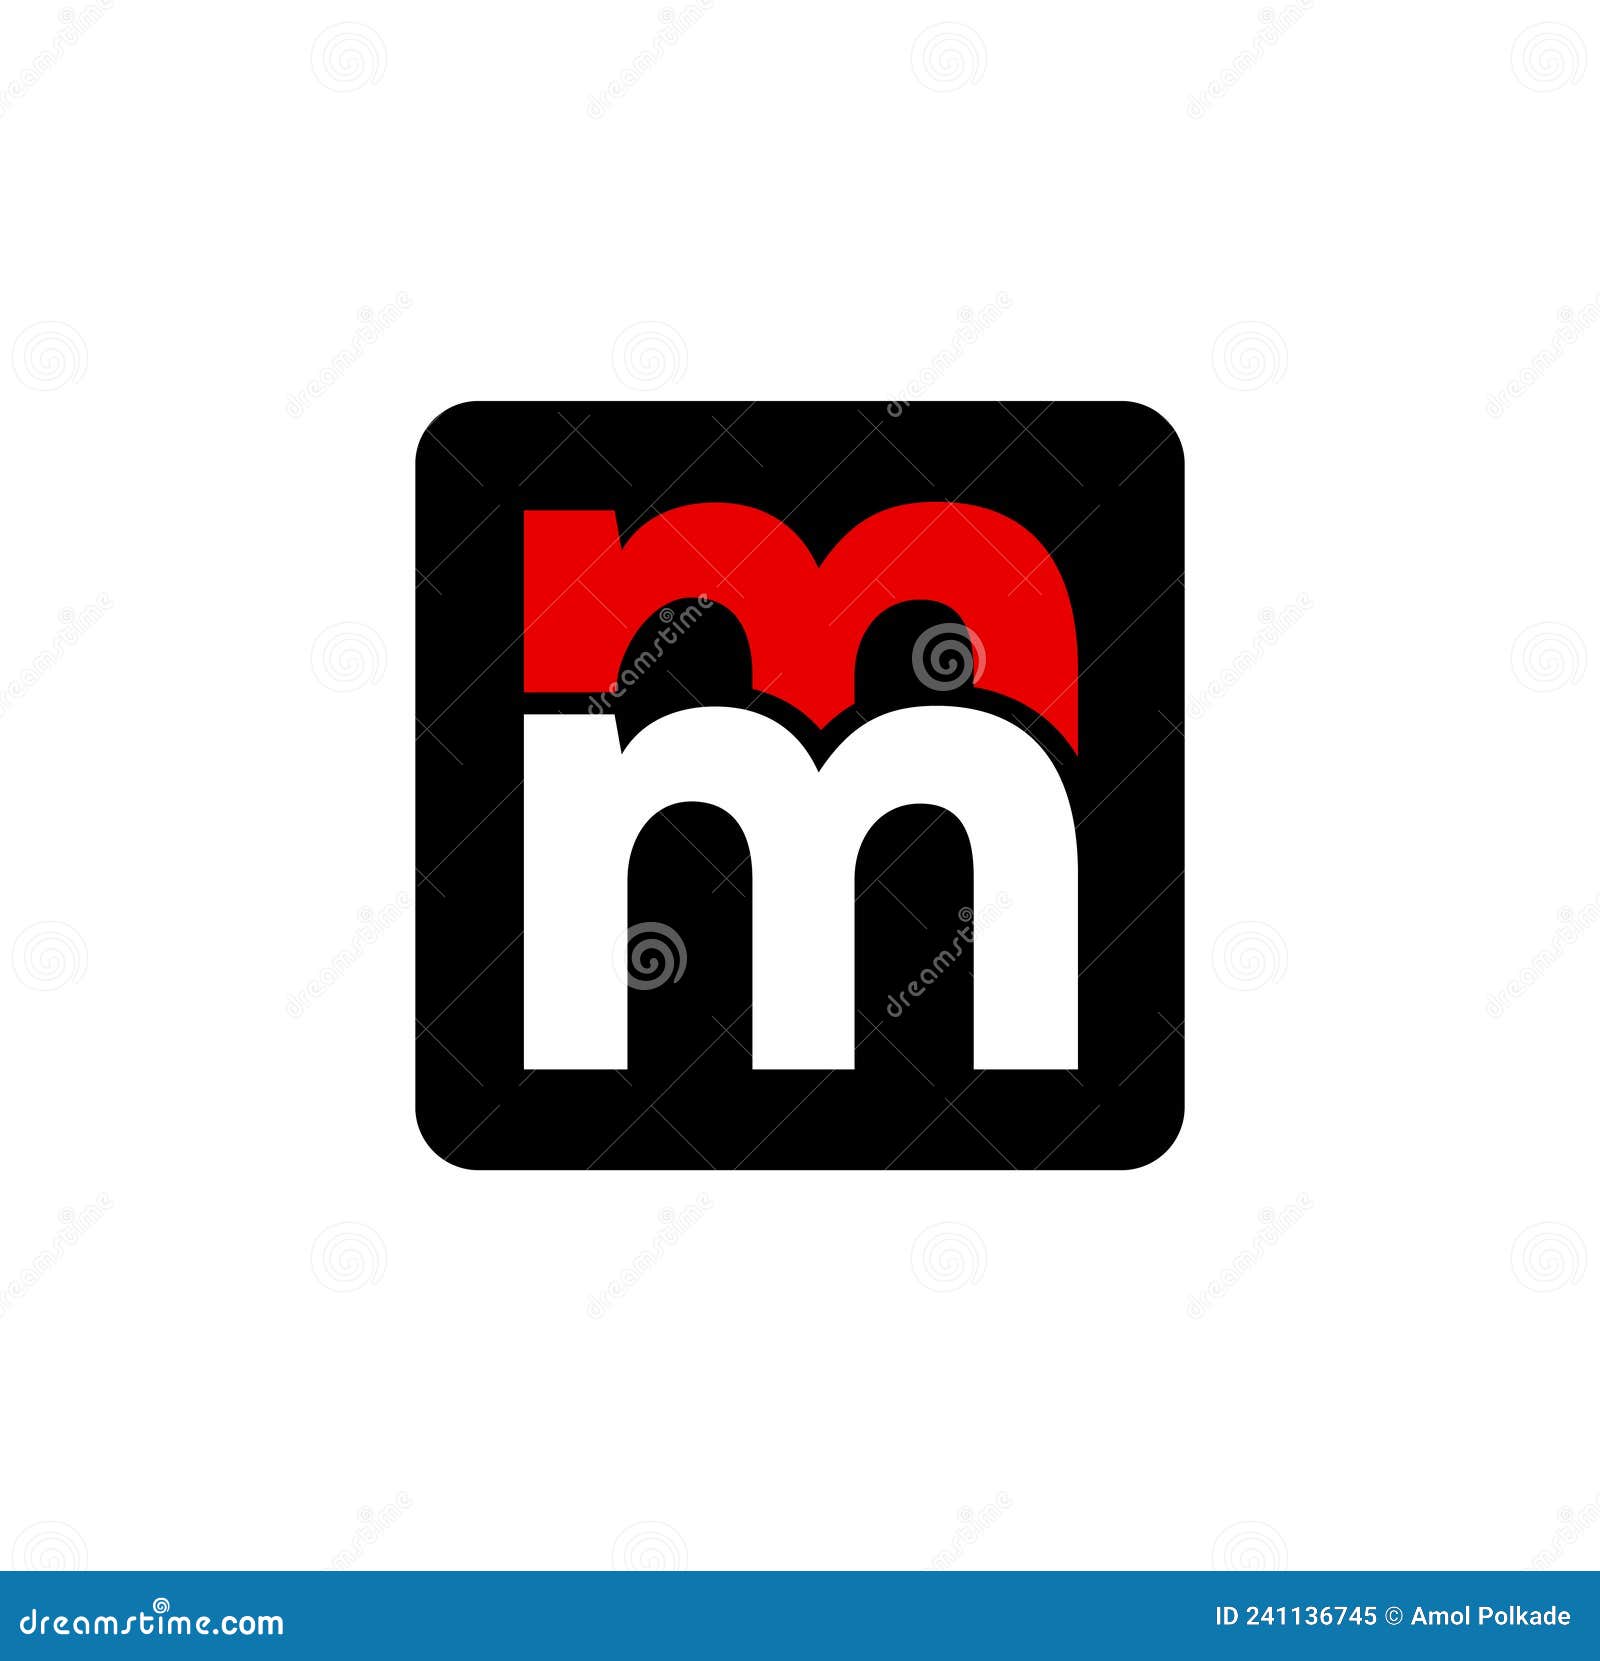 Mm Monogram Vector Images (over 2,000)